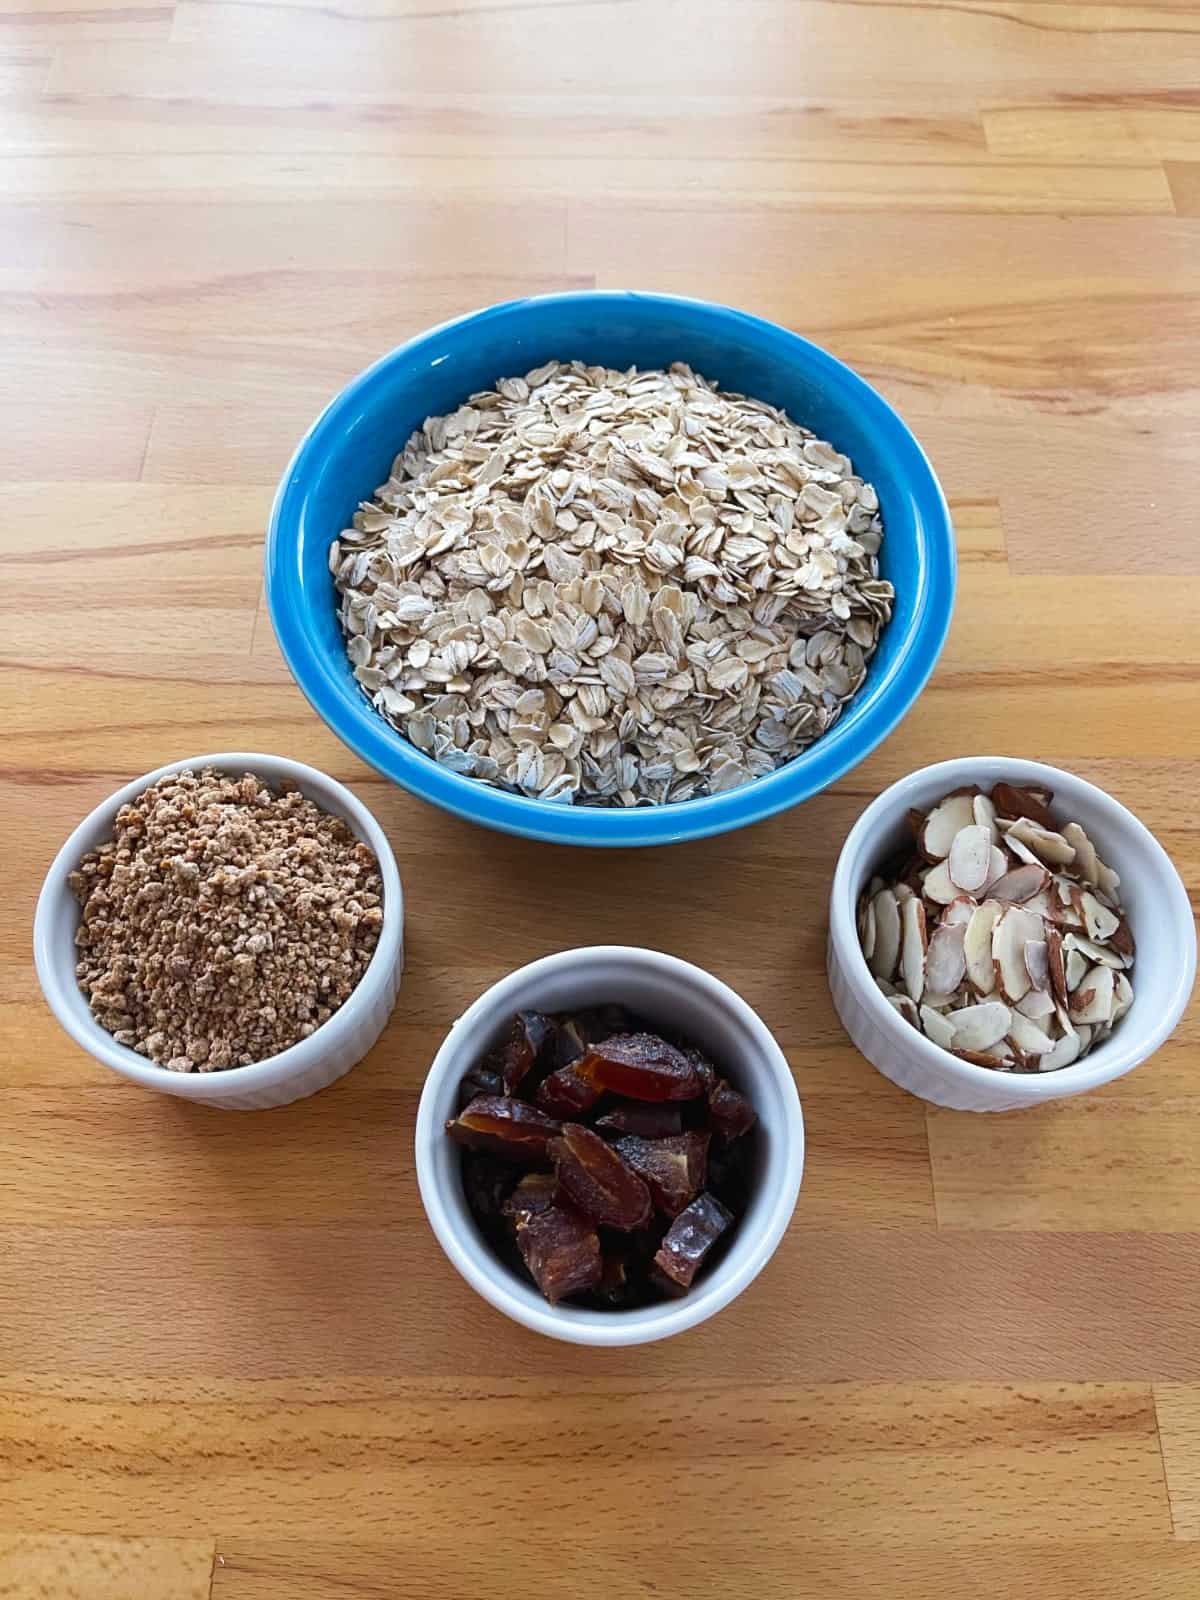 Ingredients for making oatmeal, including dry rolled oats, Grape Nuts, chopped date and sliced almonds on wooden table.